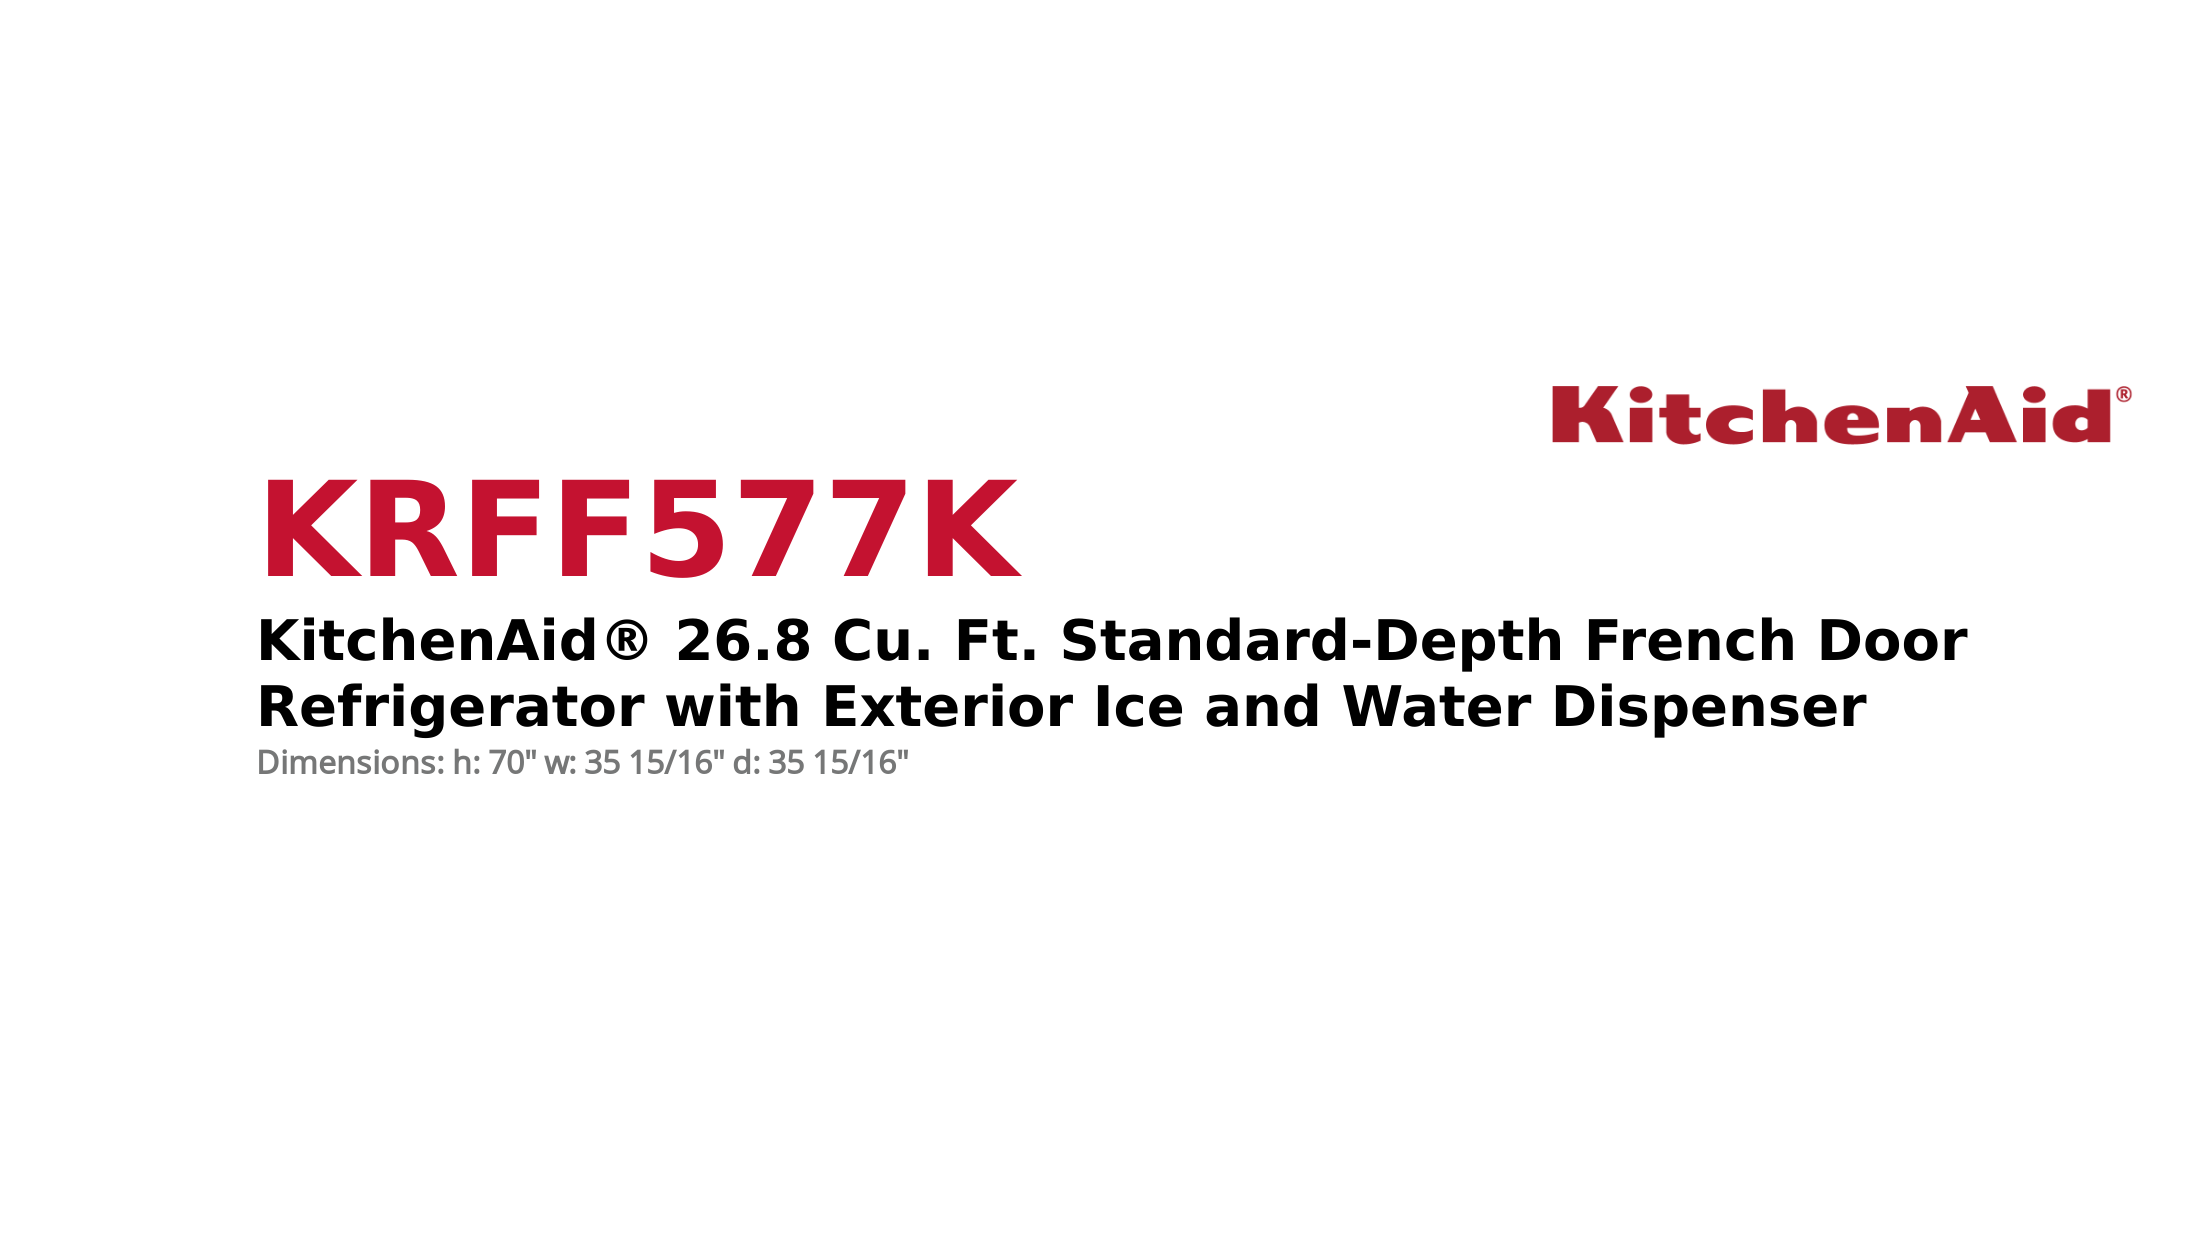 KitchenAid® 26.8 Cu. Ft. Standard-Depth French Door Refrigerator with Exterior Ice and Water Dispenser